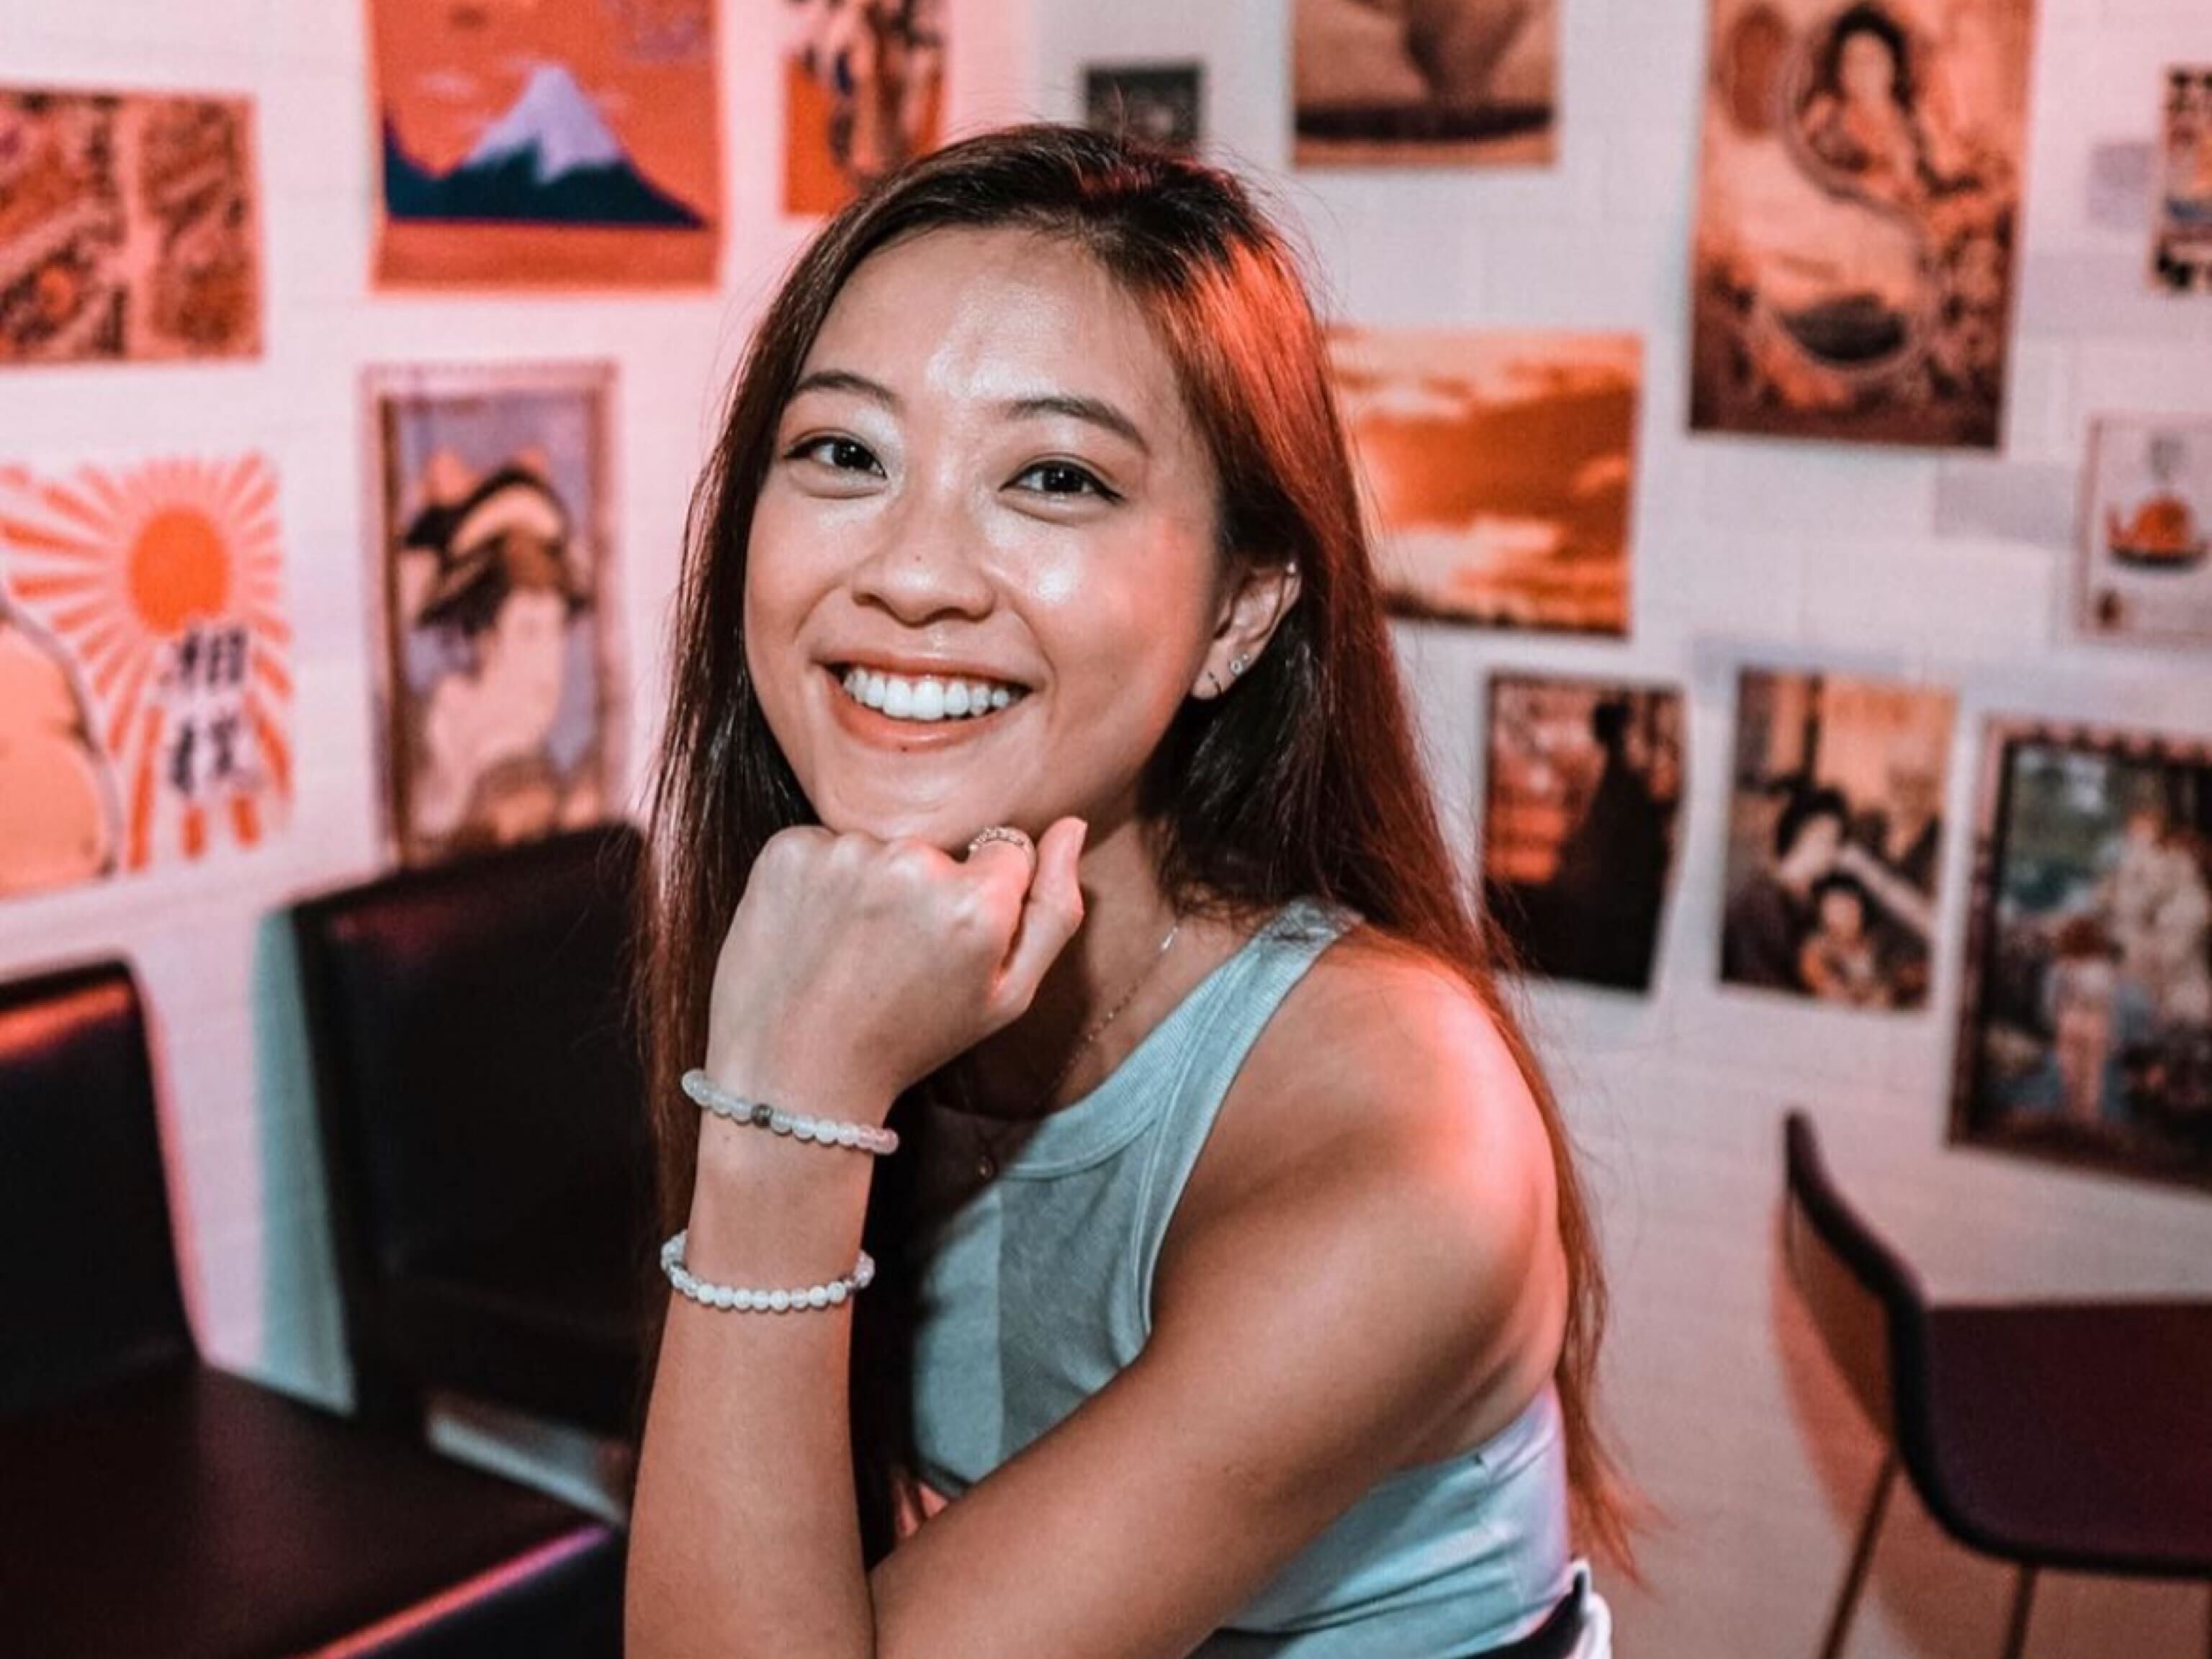 Social media influencer Rachel Wong (pictured) has sued a close friend of her ex-husband's current girlfriend for defamation over a series of Instagram Stories.